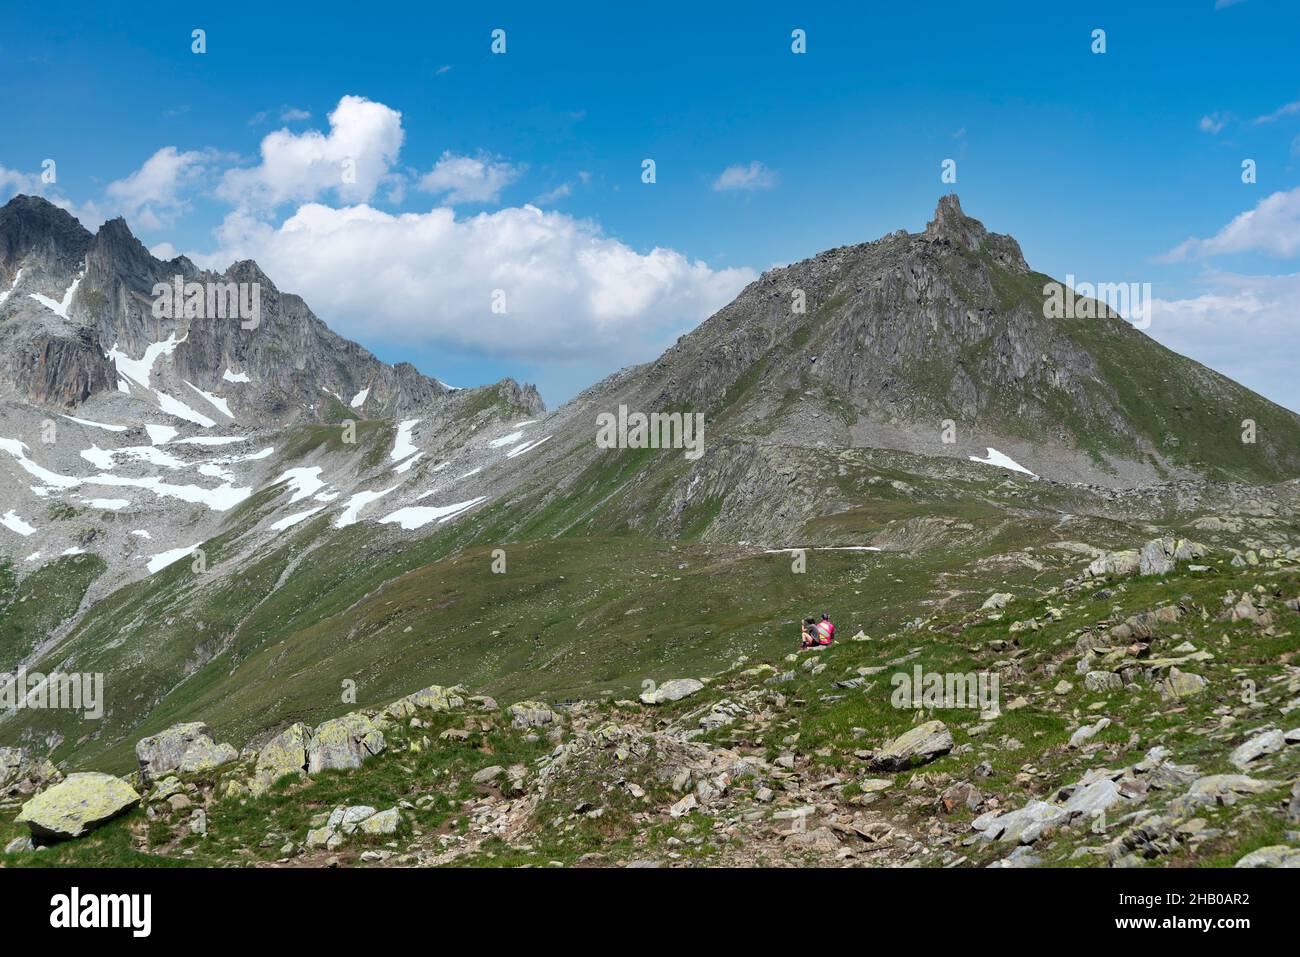 Alpine landscape at the Nufenen Pass with the mountains Piizzo Gallina and Chilchhorn, Ulrichen, Valais, Switzerland, Europe Stock Photo